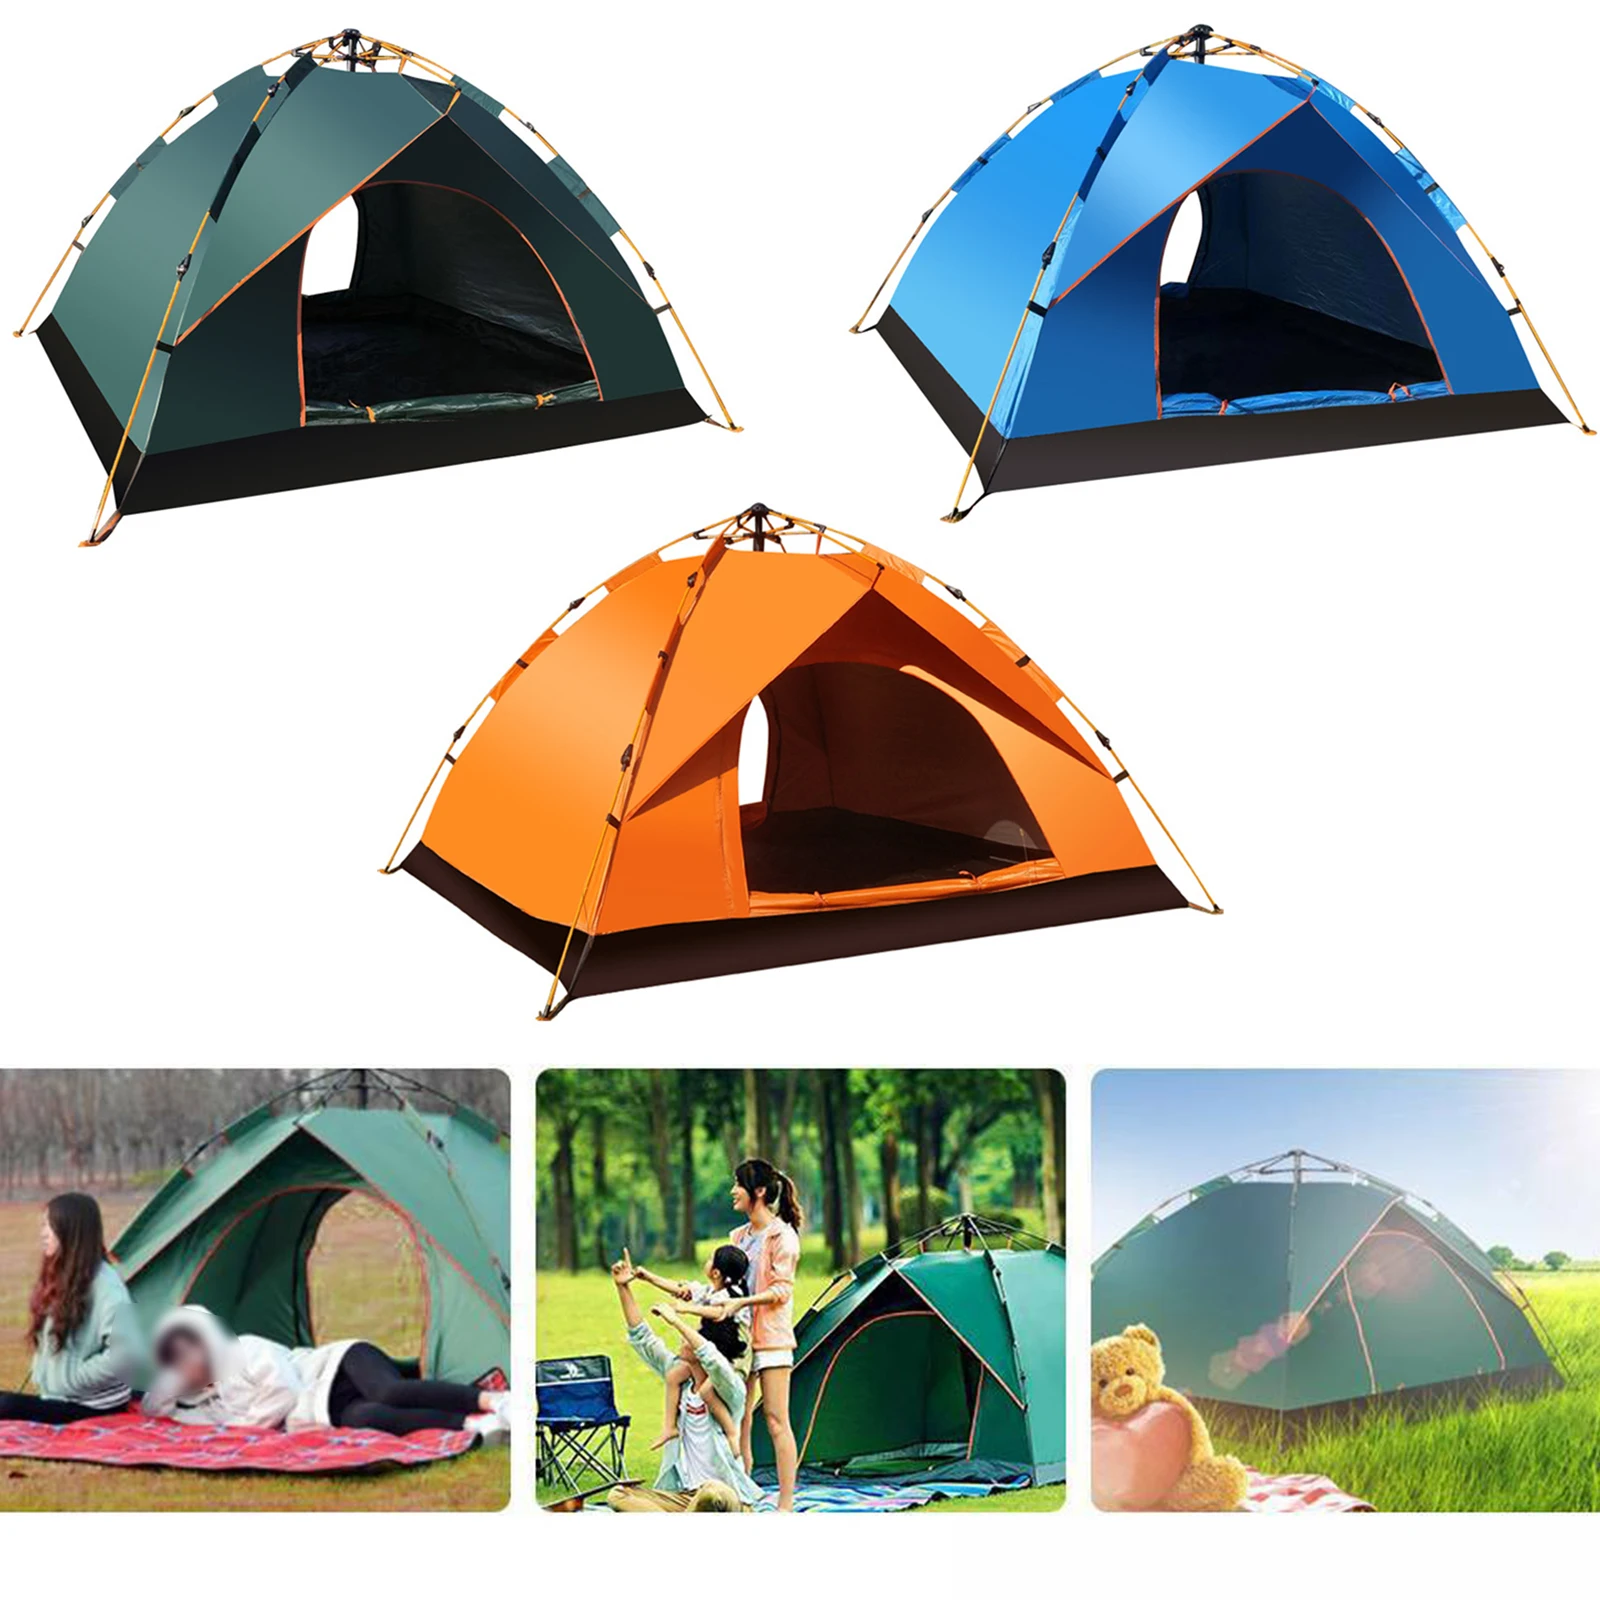 

Automatic Tent 1-4 Person Camping Tents Easy Instant Setup Protable Backpacking for Outside Sun Shelter Travel Hike Camp Awnings